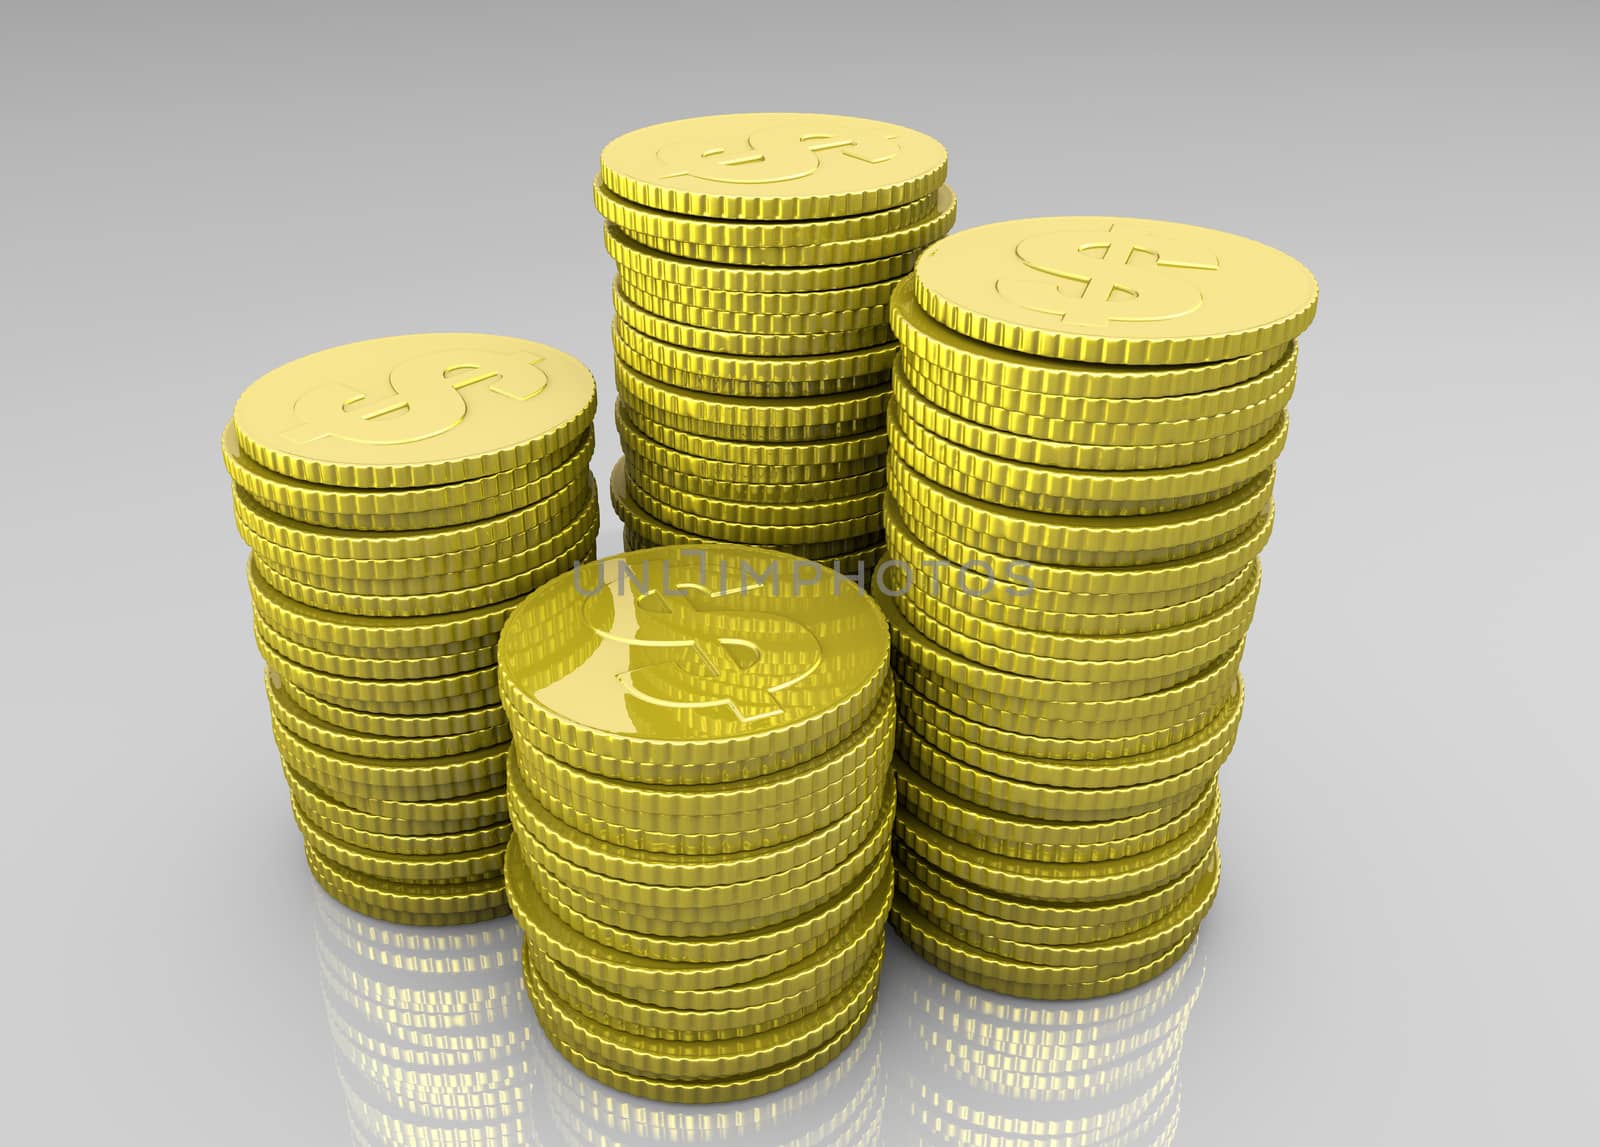 Four stacks of coins by TaiChesco